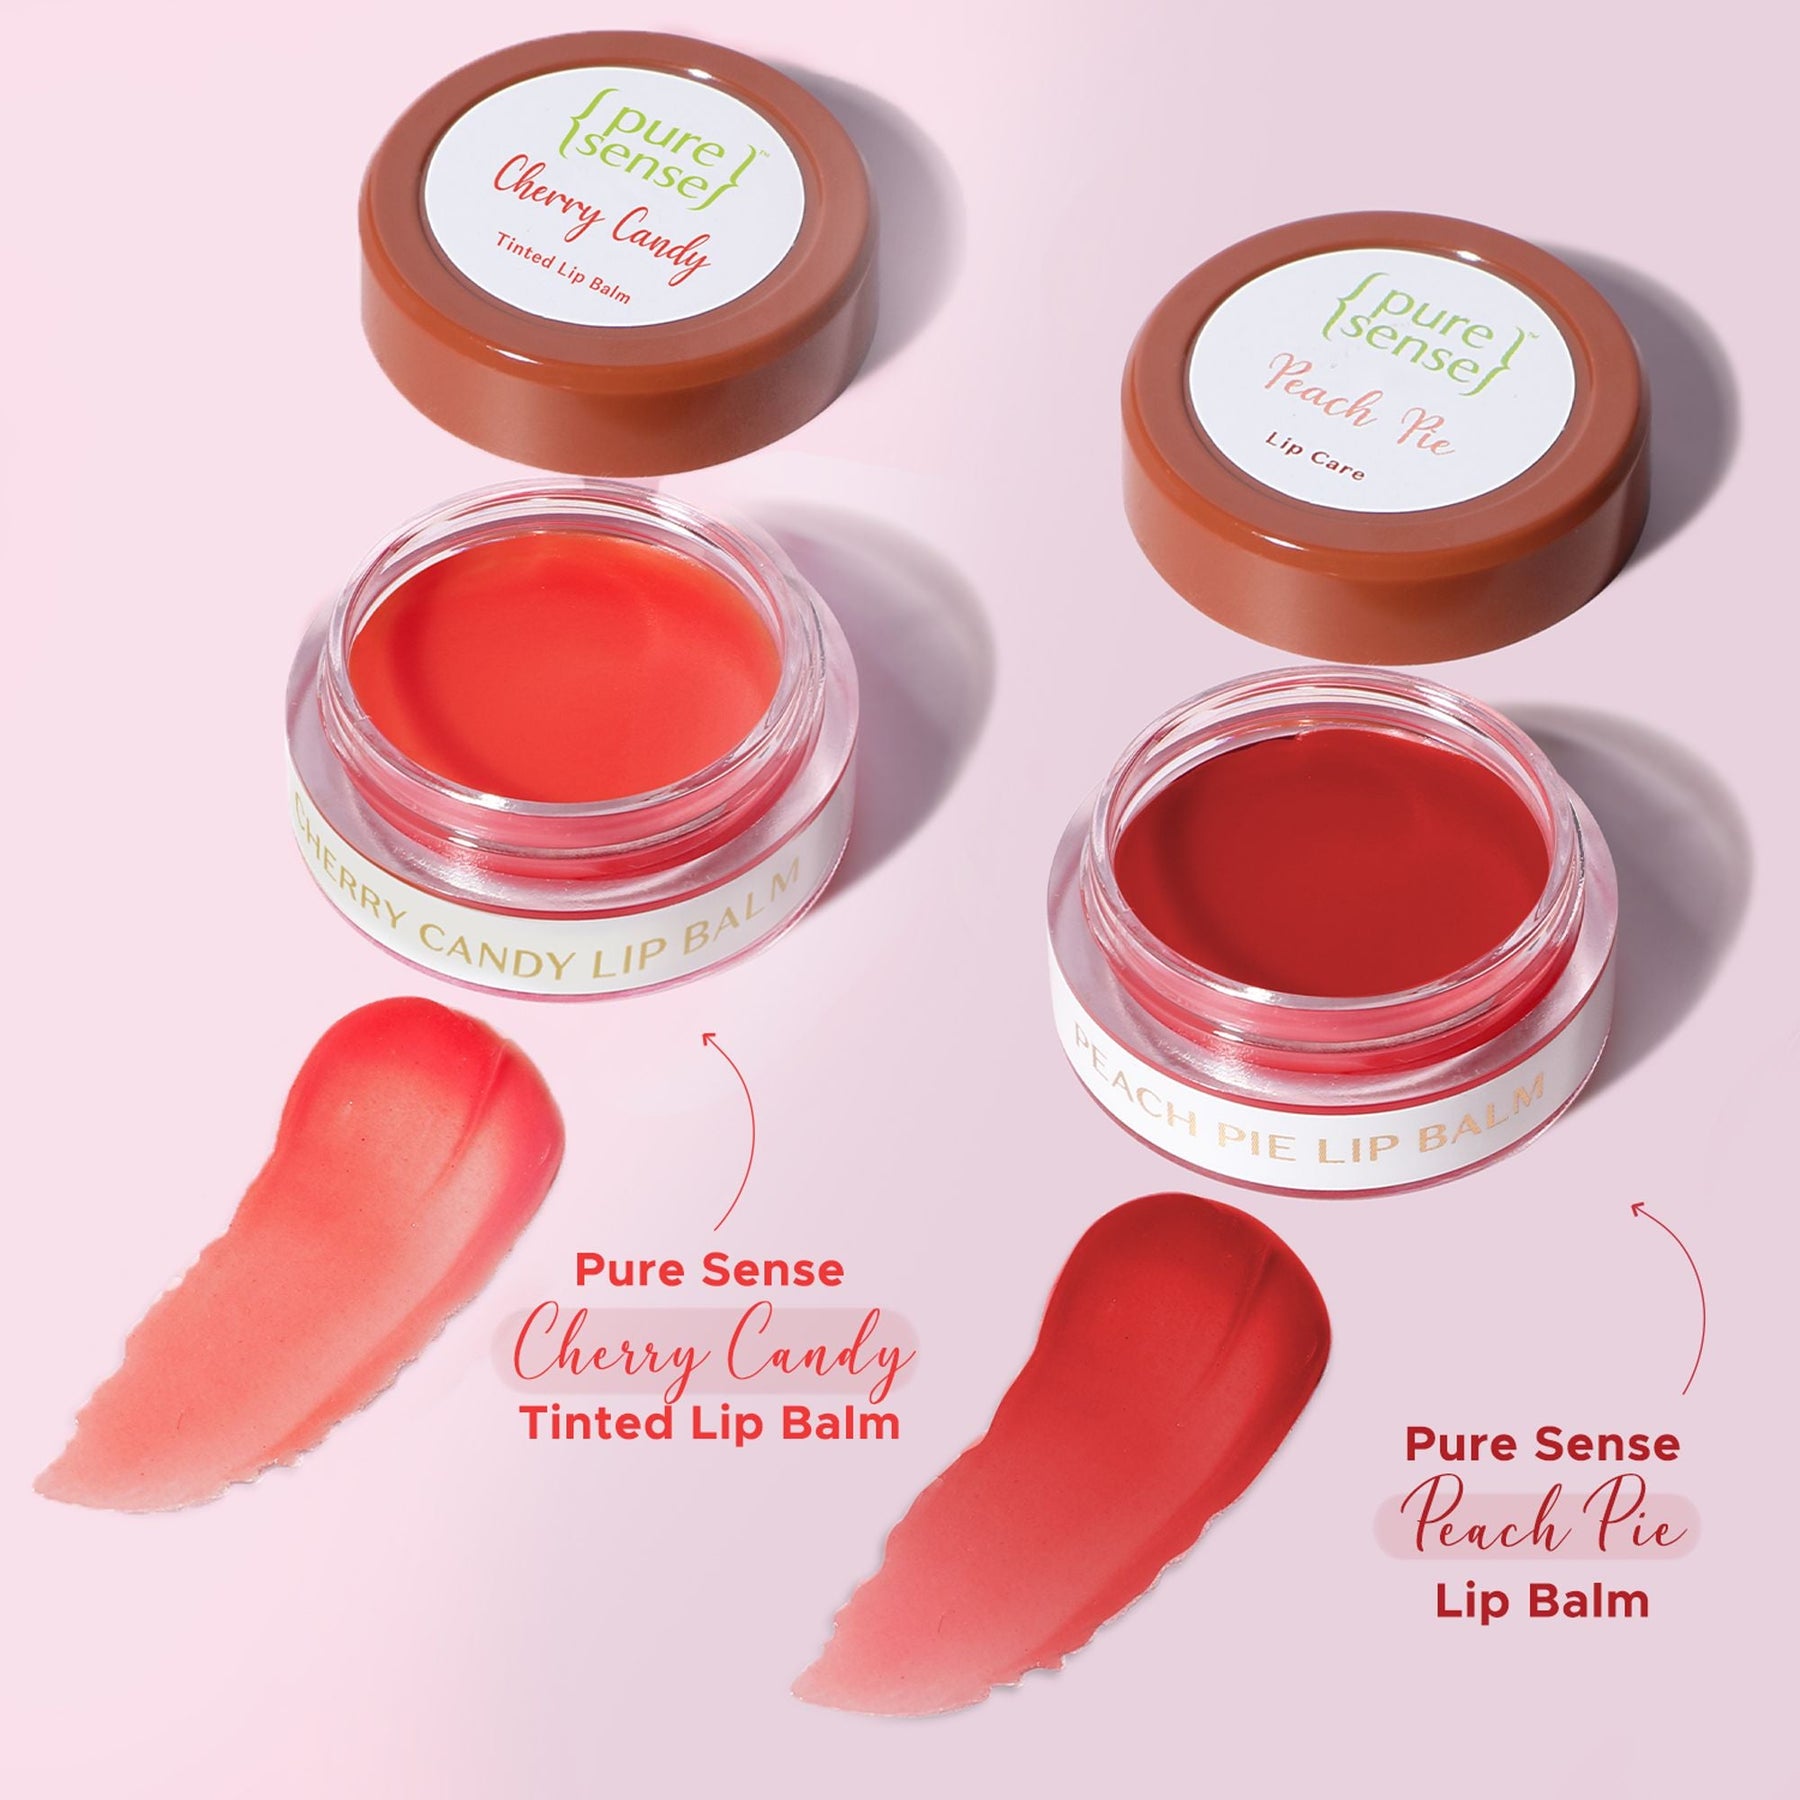 [CRED] Cherry Candy Tinted Lip Balm 5ml +  Peach Pie Lip Balm 5ml | Pack of 2 | From the makers of Parachute Advansed | 10ml